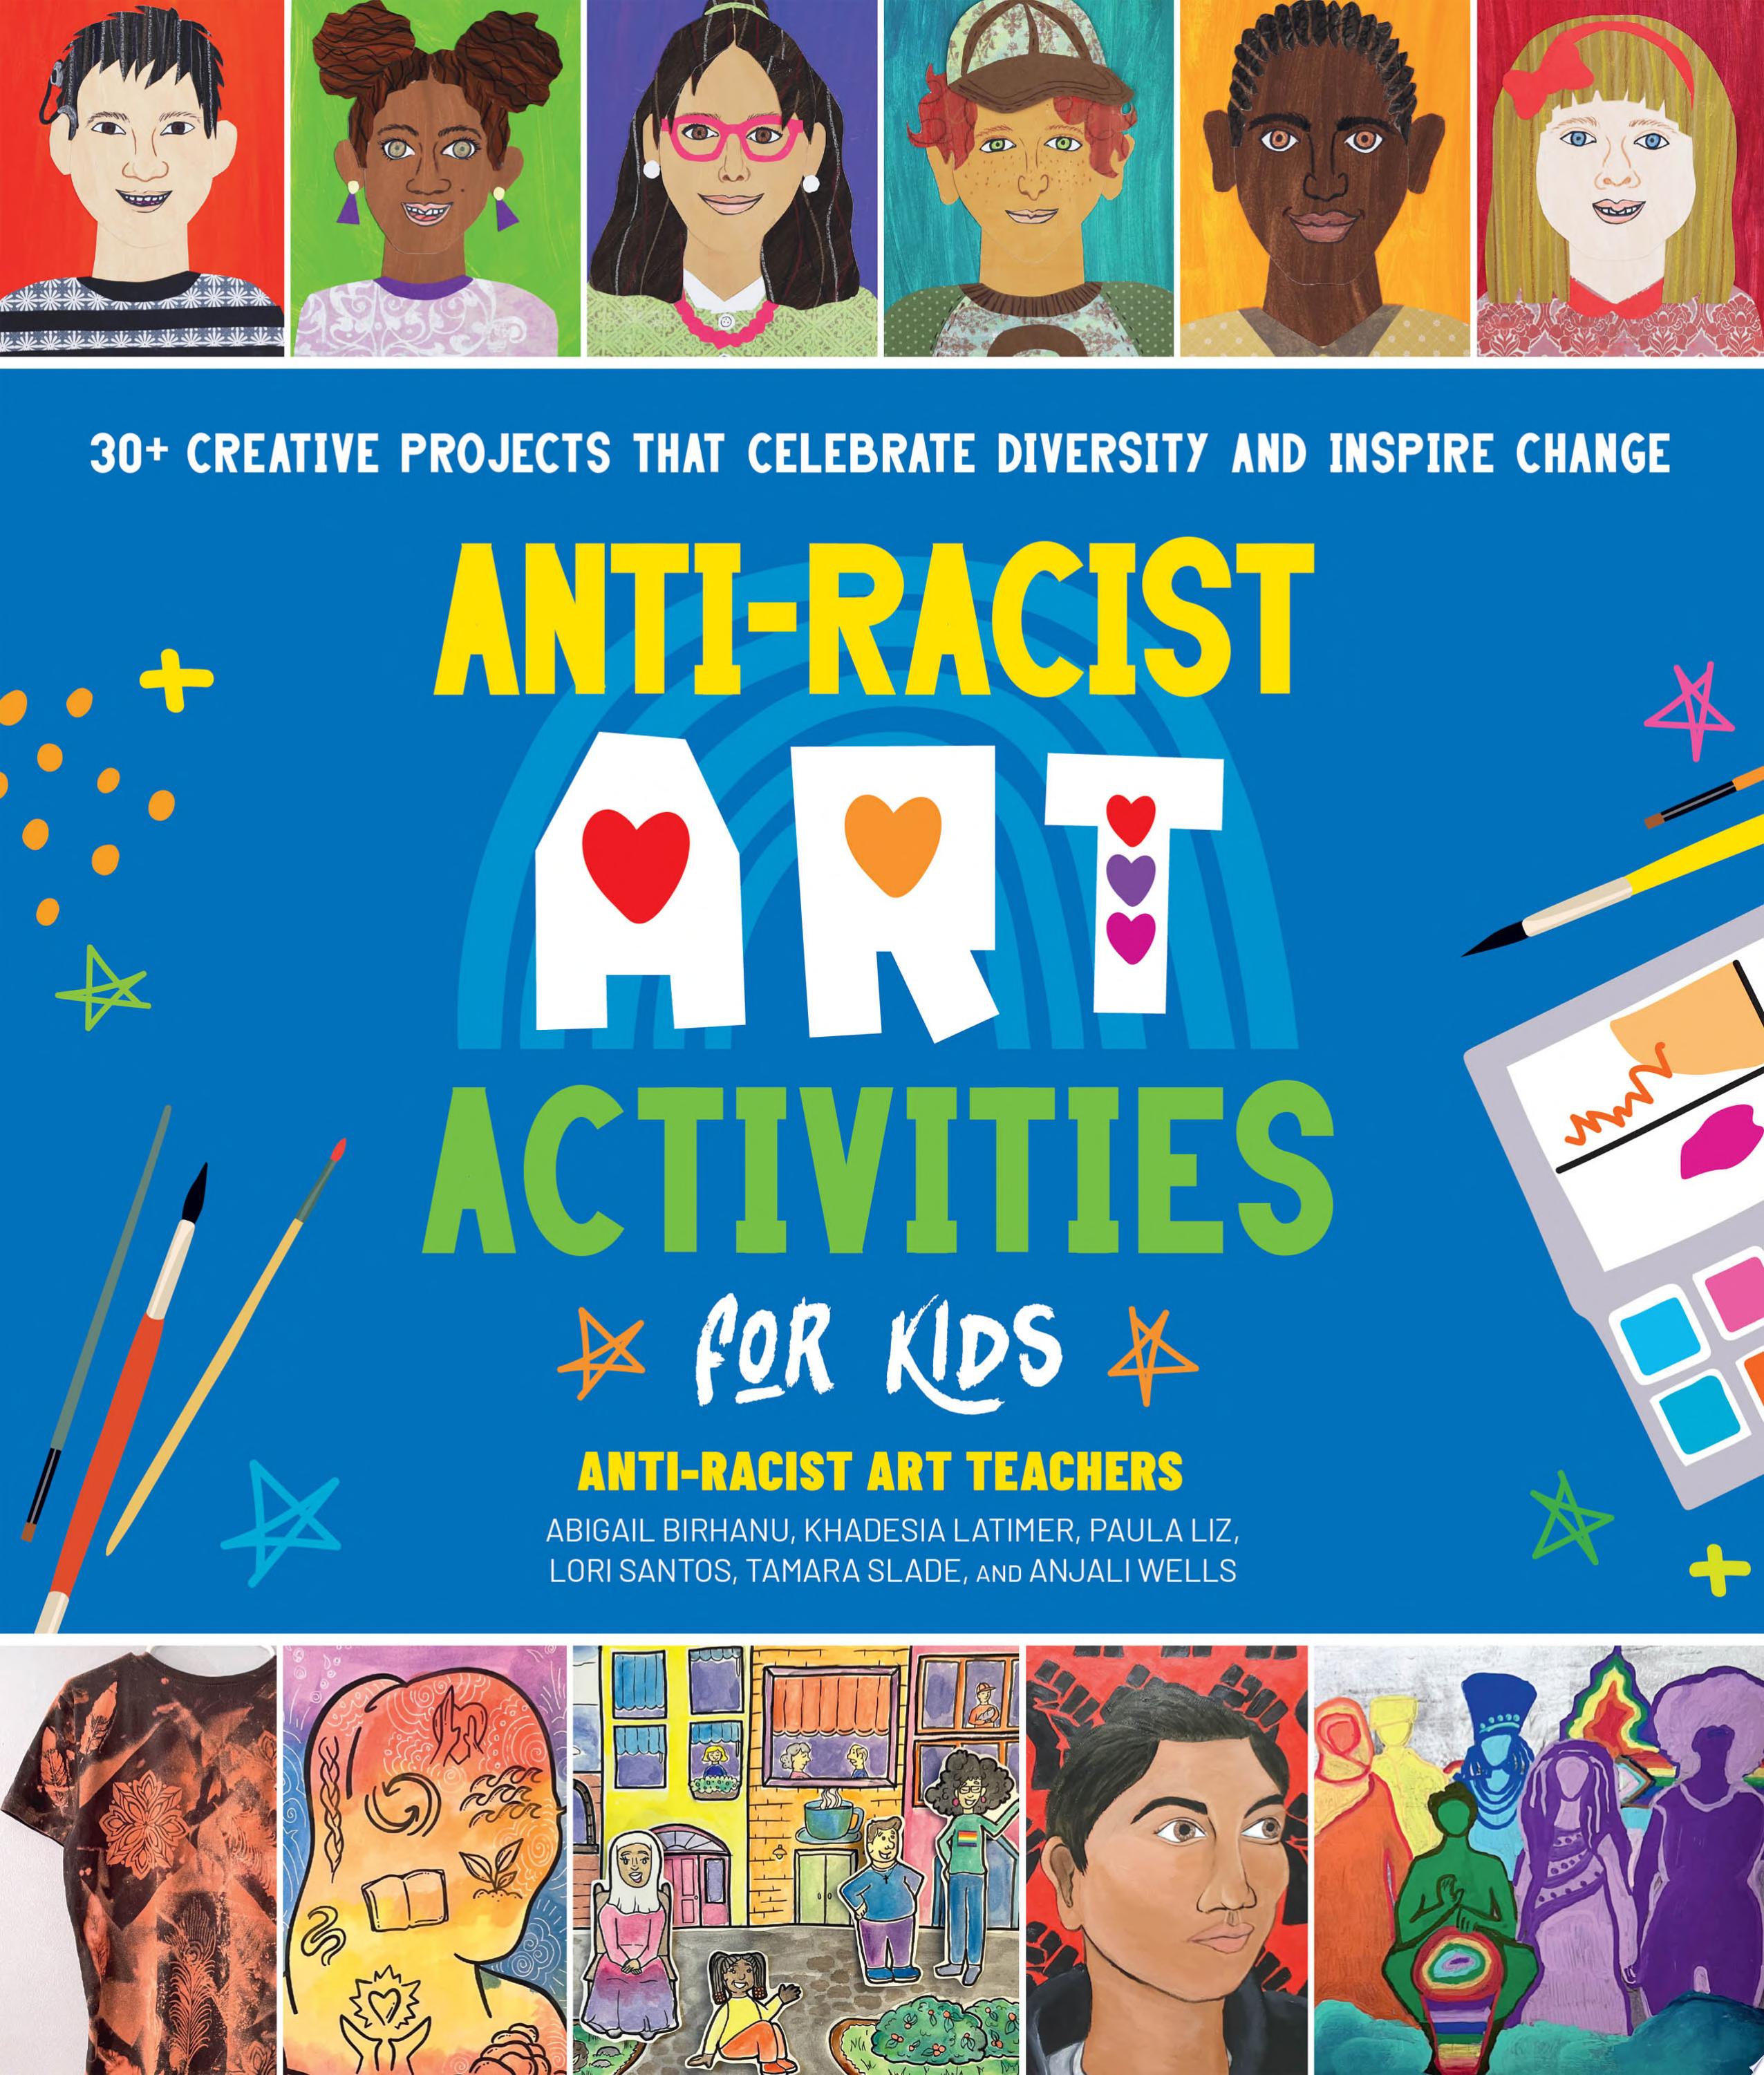 Image for "Anti-Racist Art Activities for Kids"